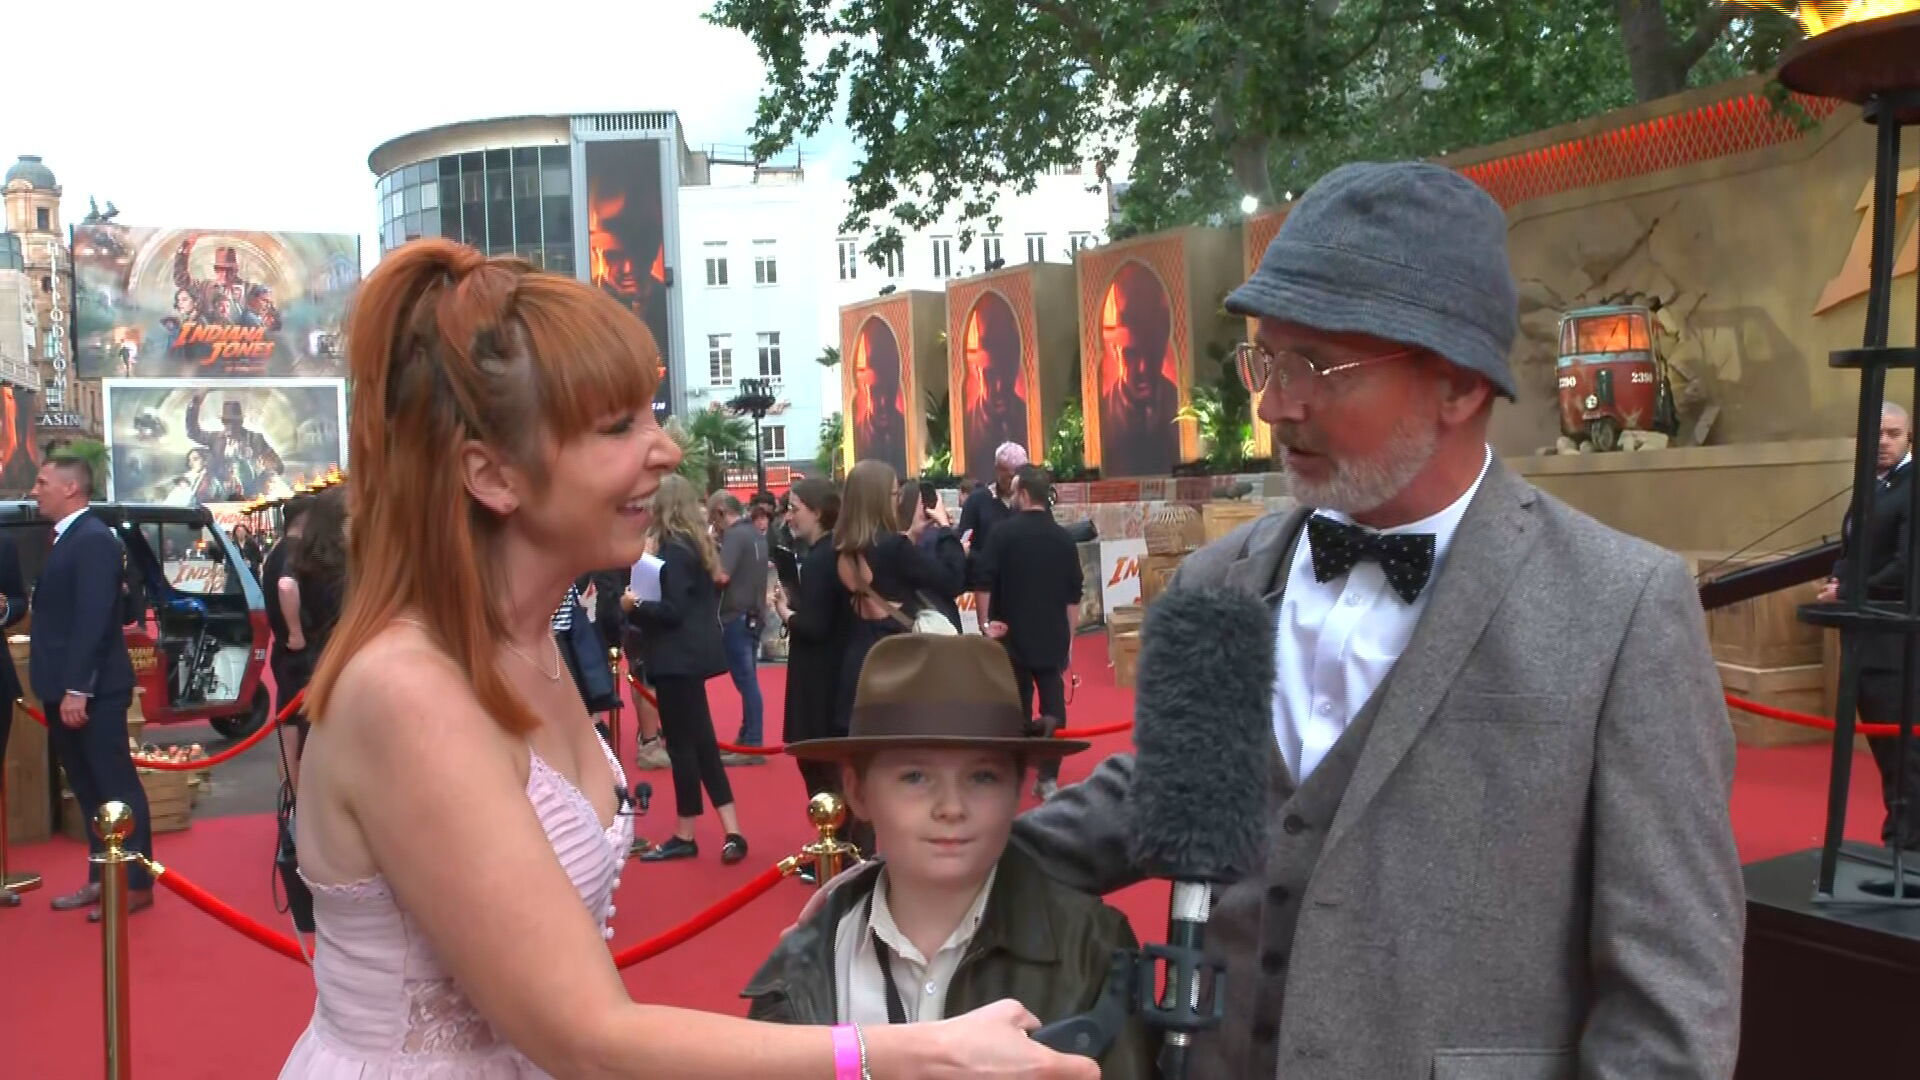 Isla with her dad Alastair Neil were invited to the London premiere of the new Indiana Jones film.